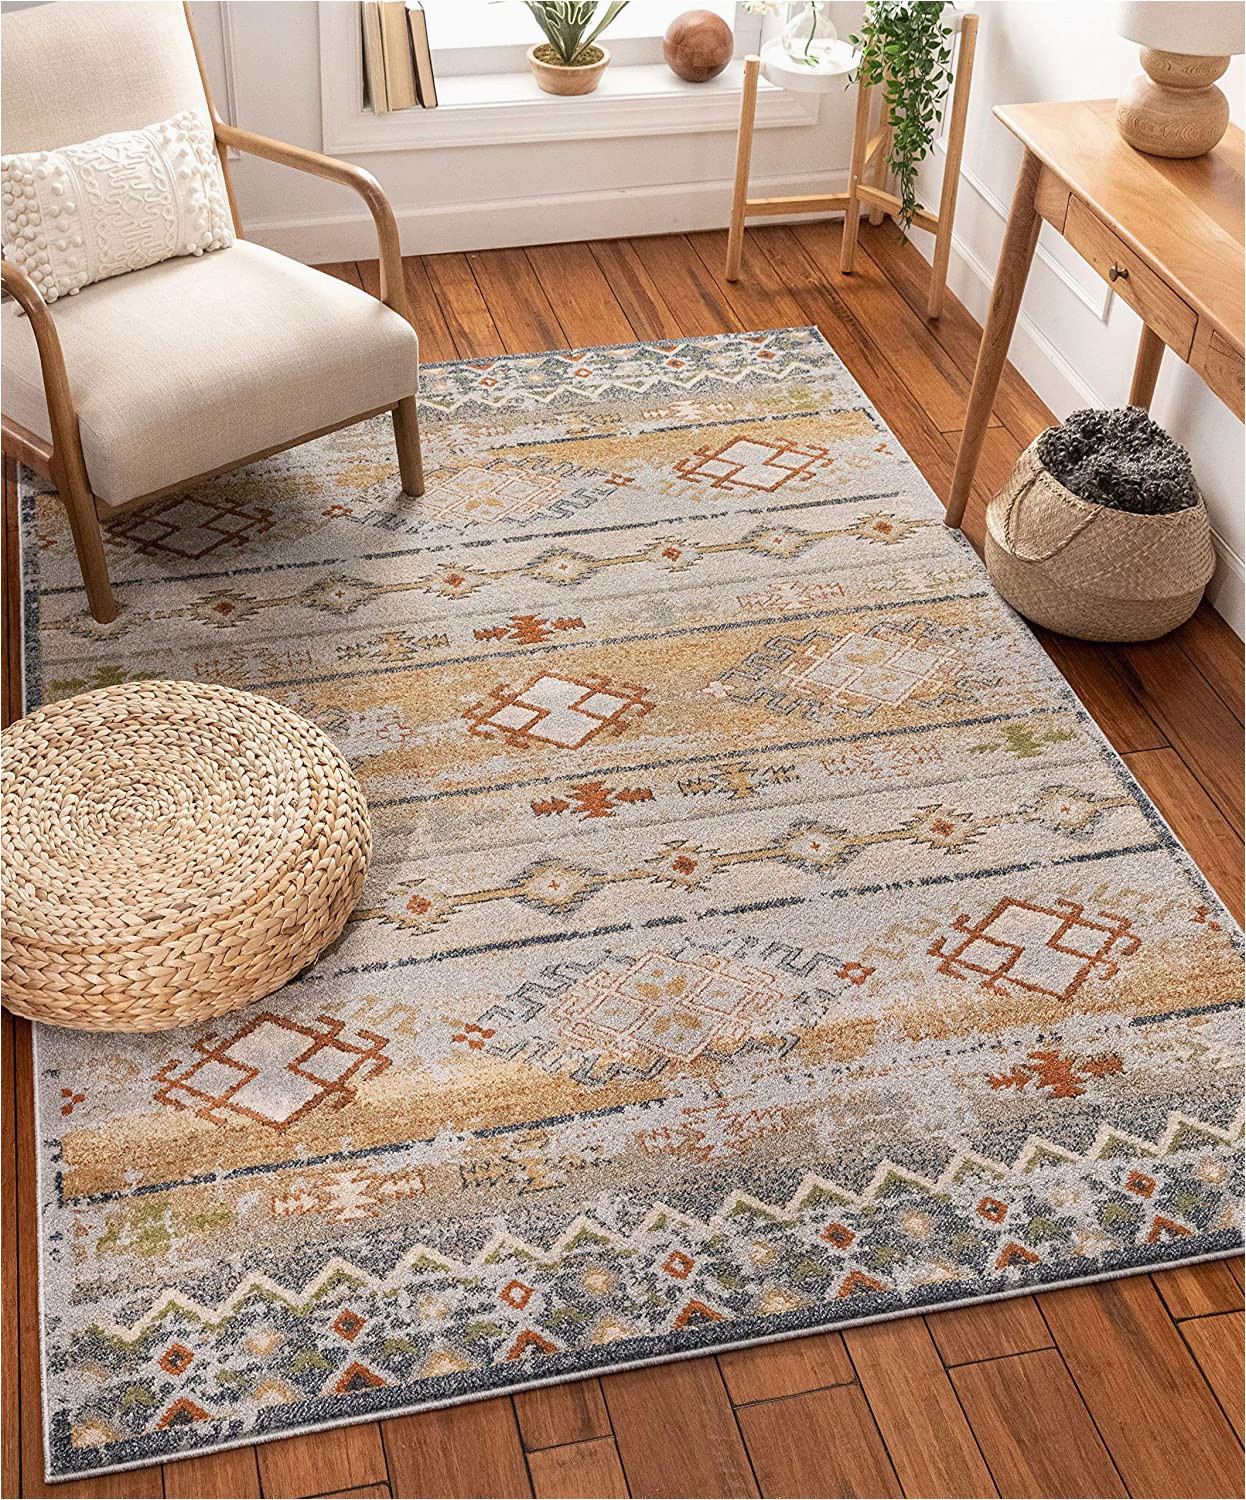 Bed Bath and Beyond Small area Rugs Well Woven Elu Cream Vintage Panel Pattern area Rug 5×7 5 3" X 7 3"